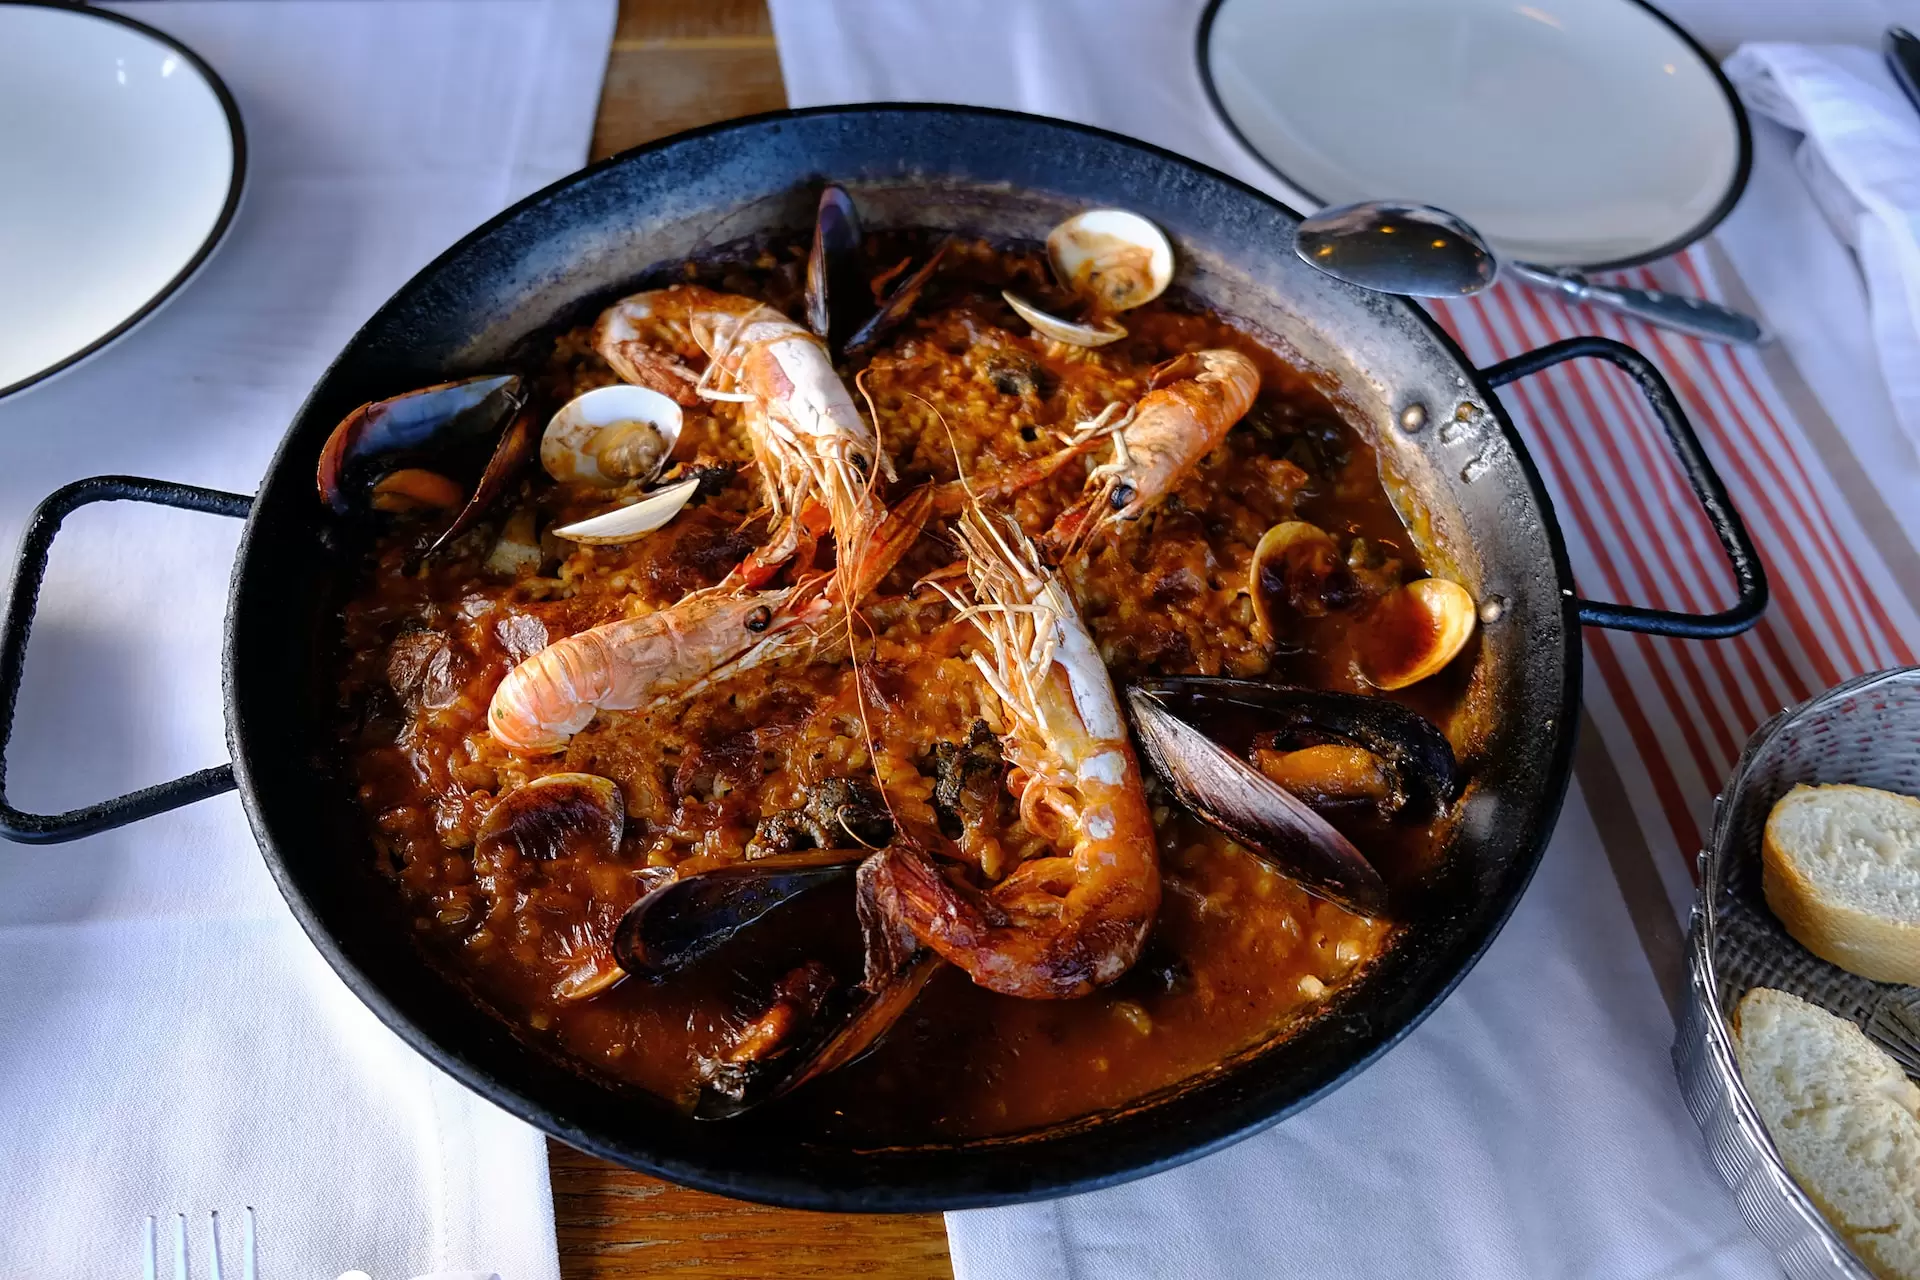 Spanish Paella from a restaurant in Pinellas Park Florida